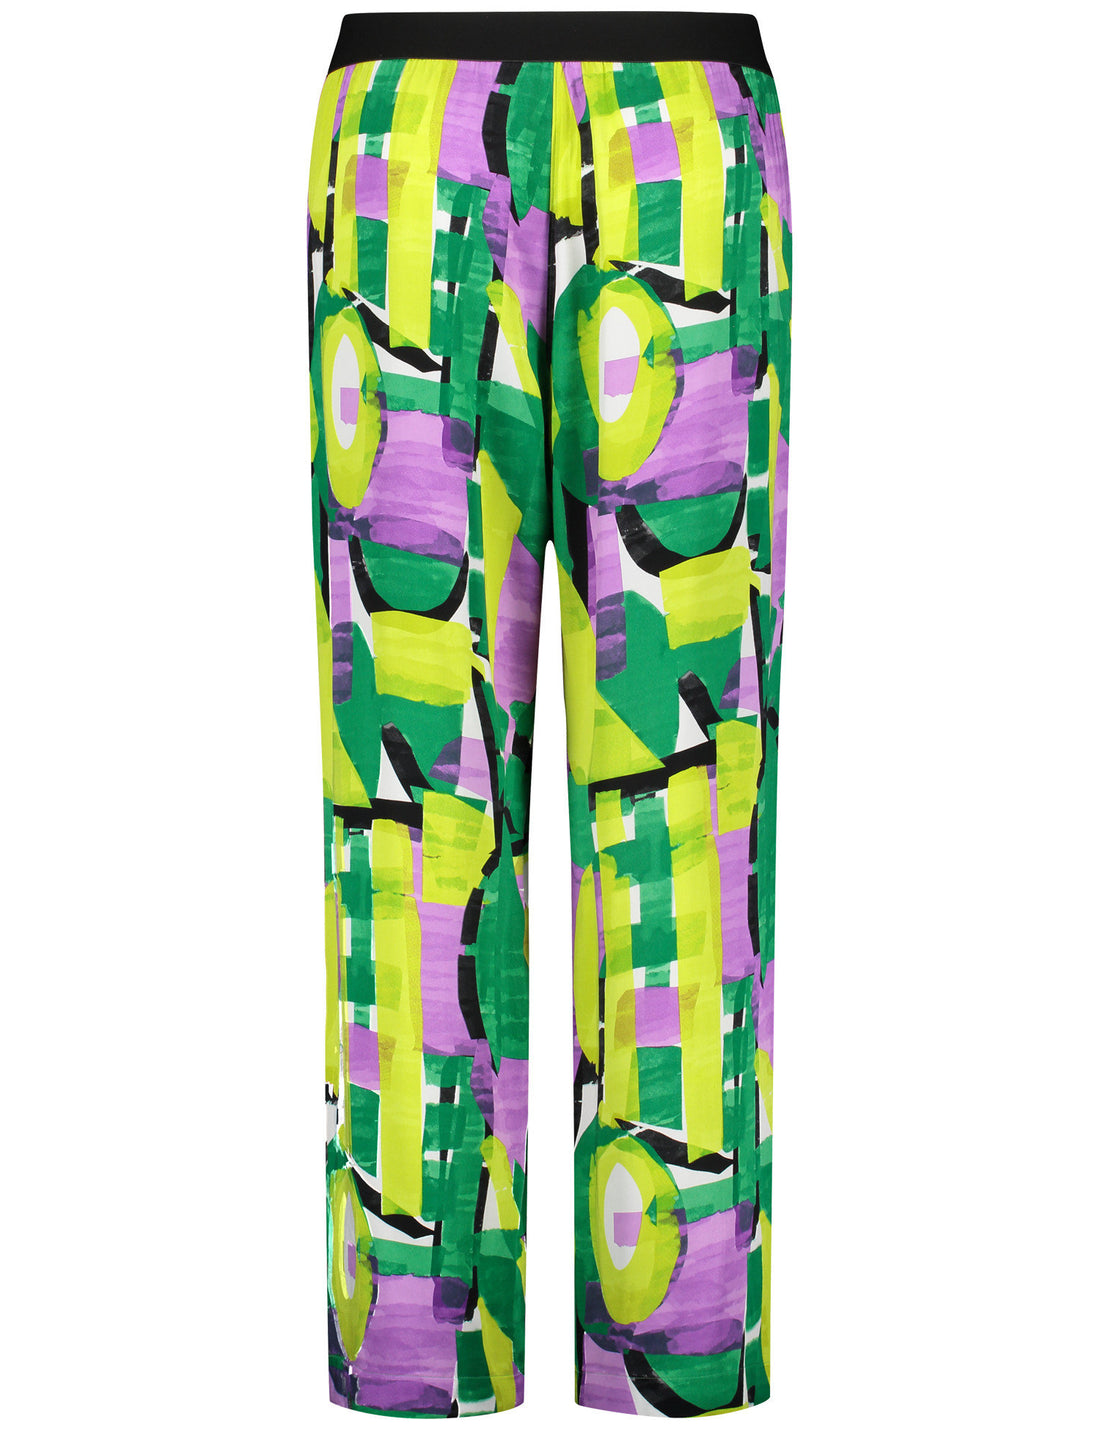 Palazzo Trousers With An All-Over Print_420028-21063_5602_02